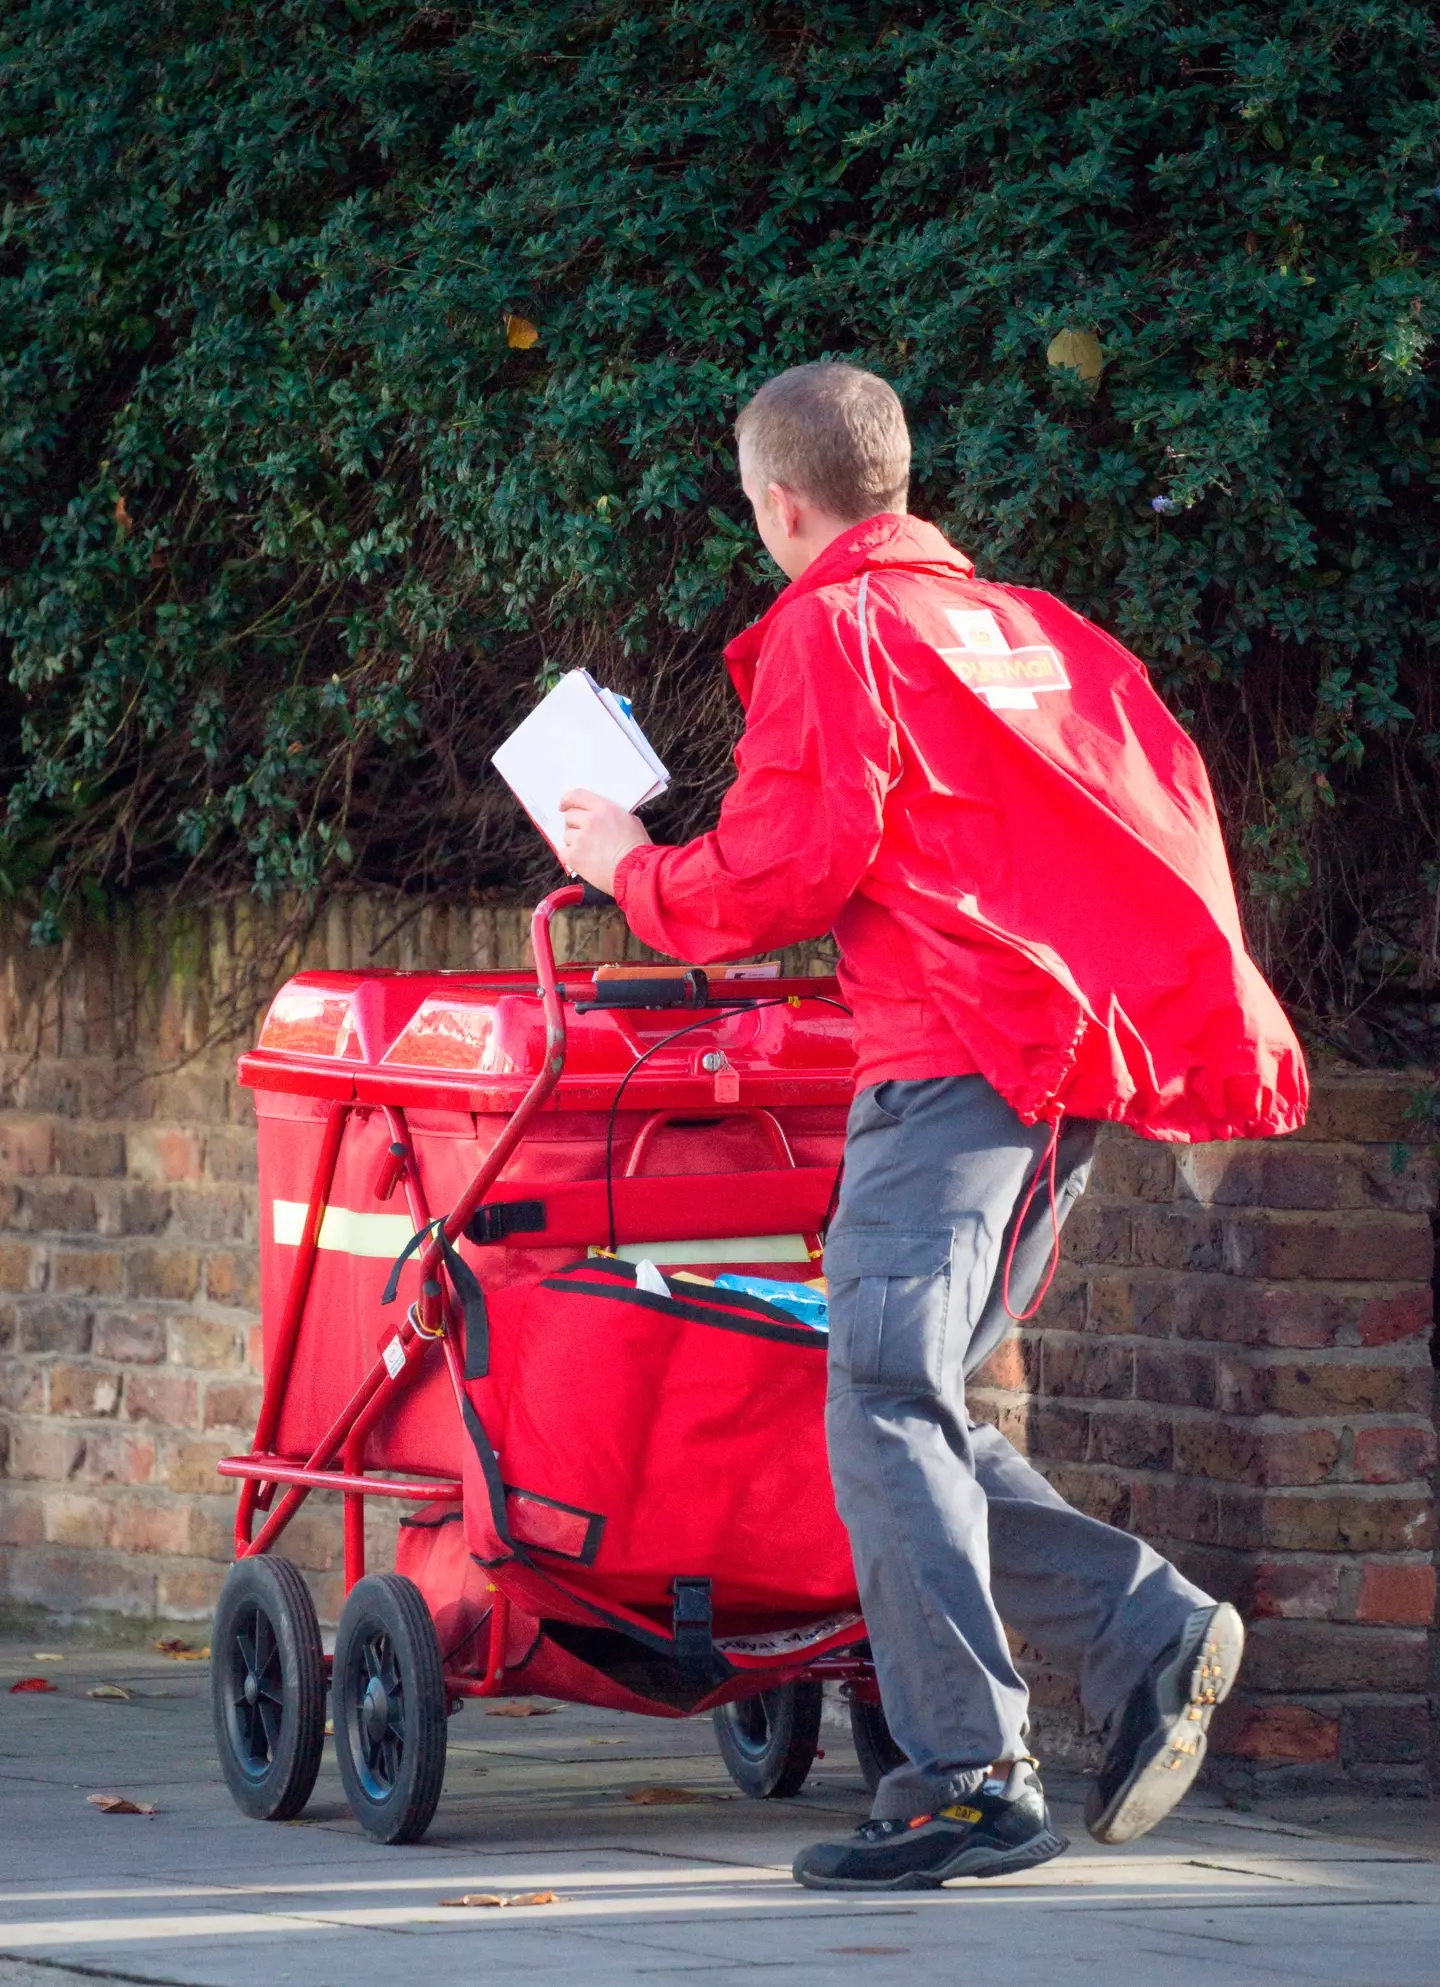 An undercover postie has provided the lowdown.